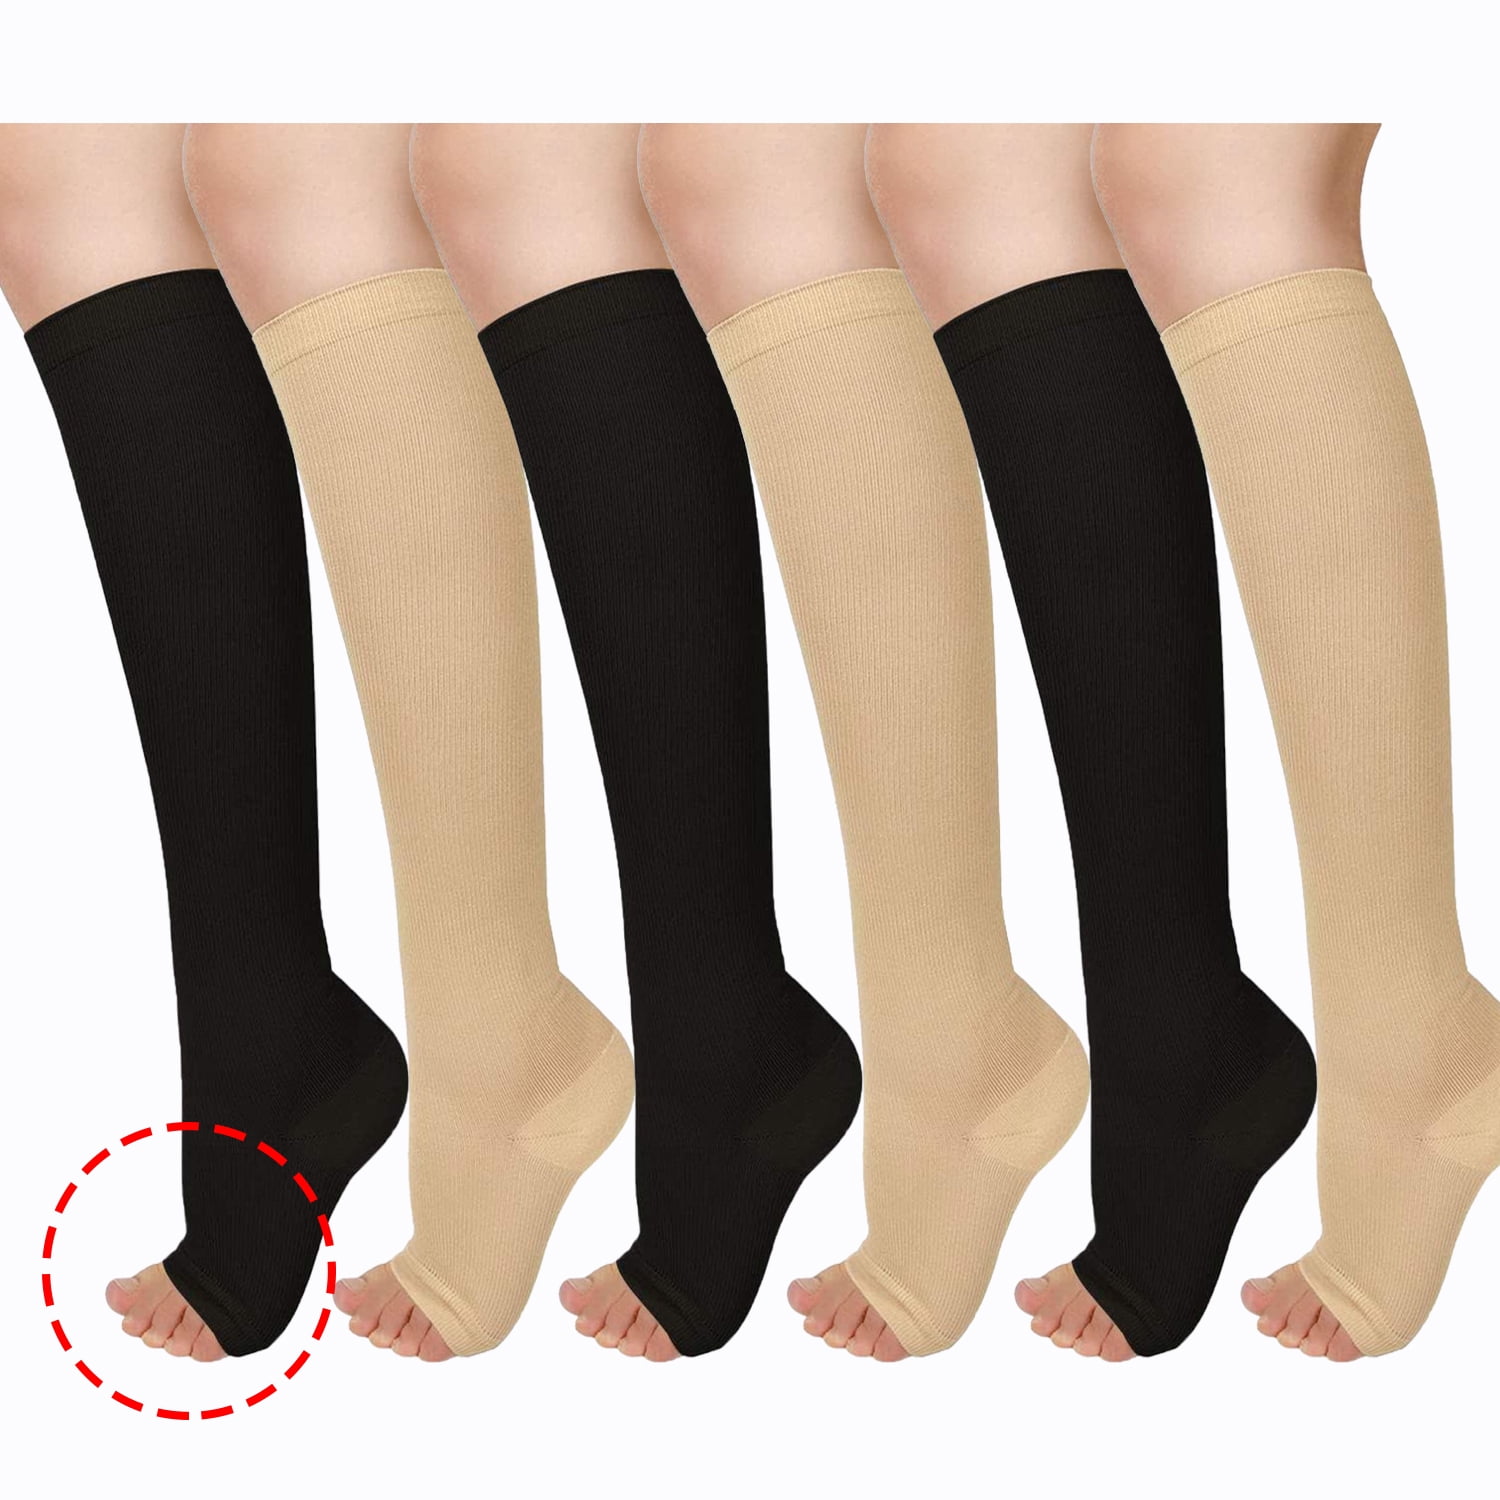 3 Pairs L XL Knee High Compression Stockings Open Toe 15-20mmhg ...